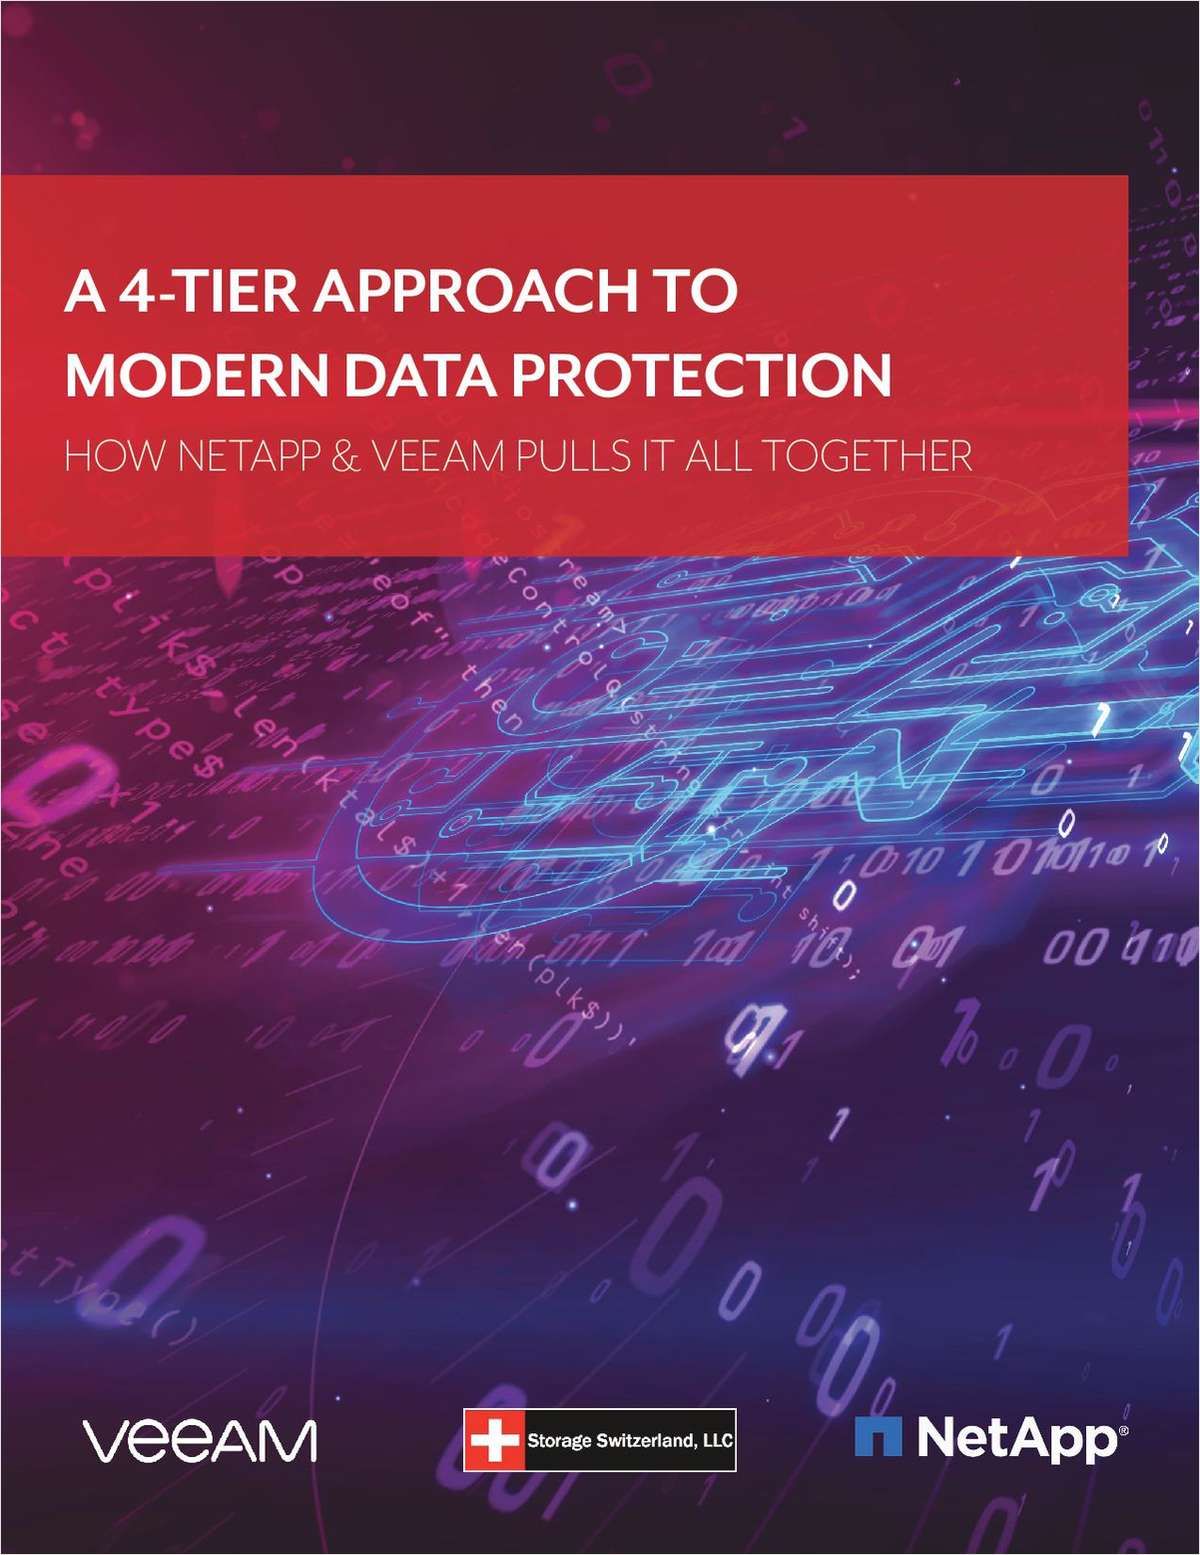 A 4-TIER APPROACH TO MODERN DATA PROTECTION